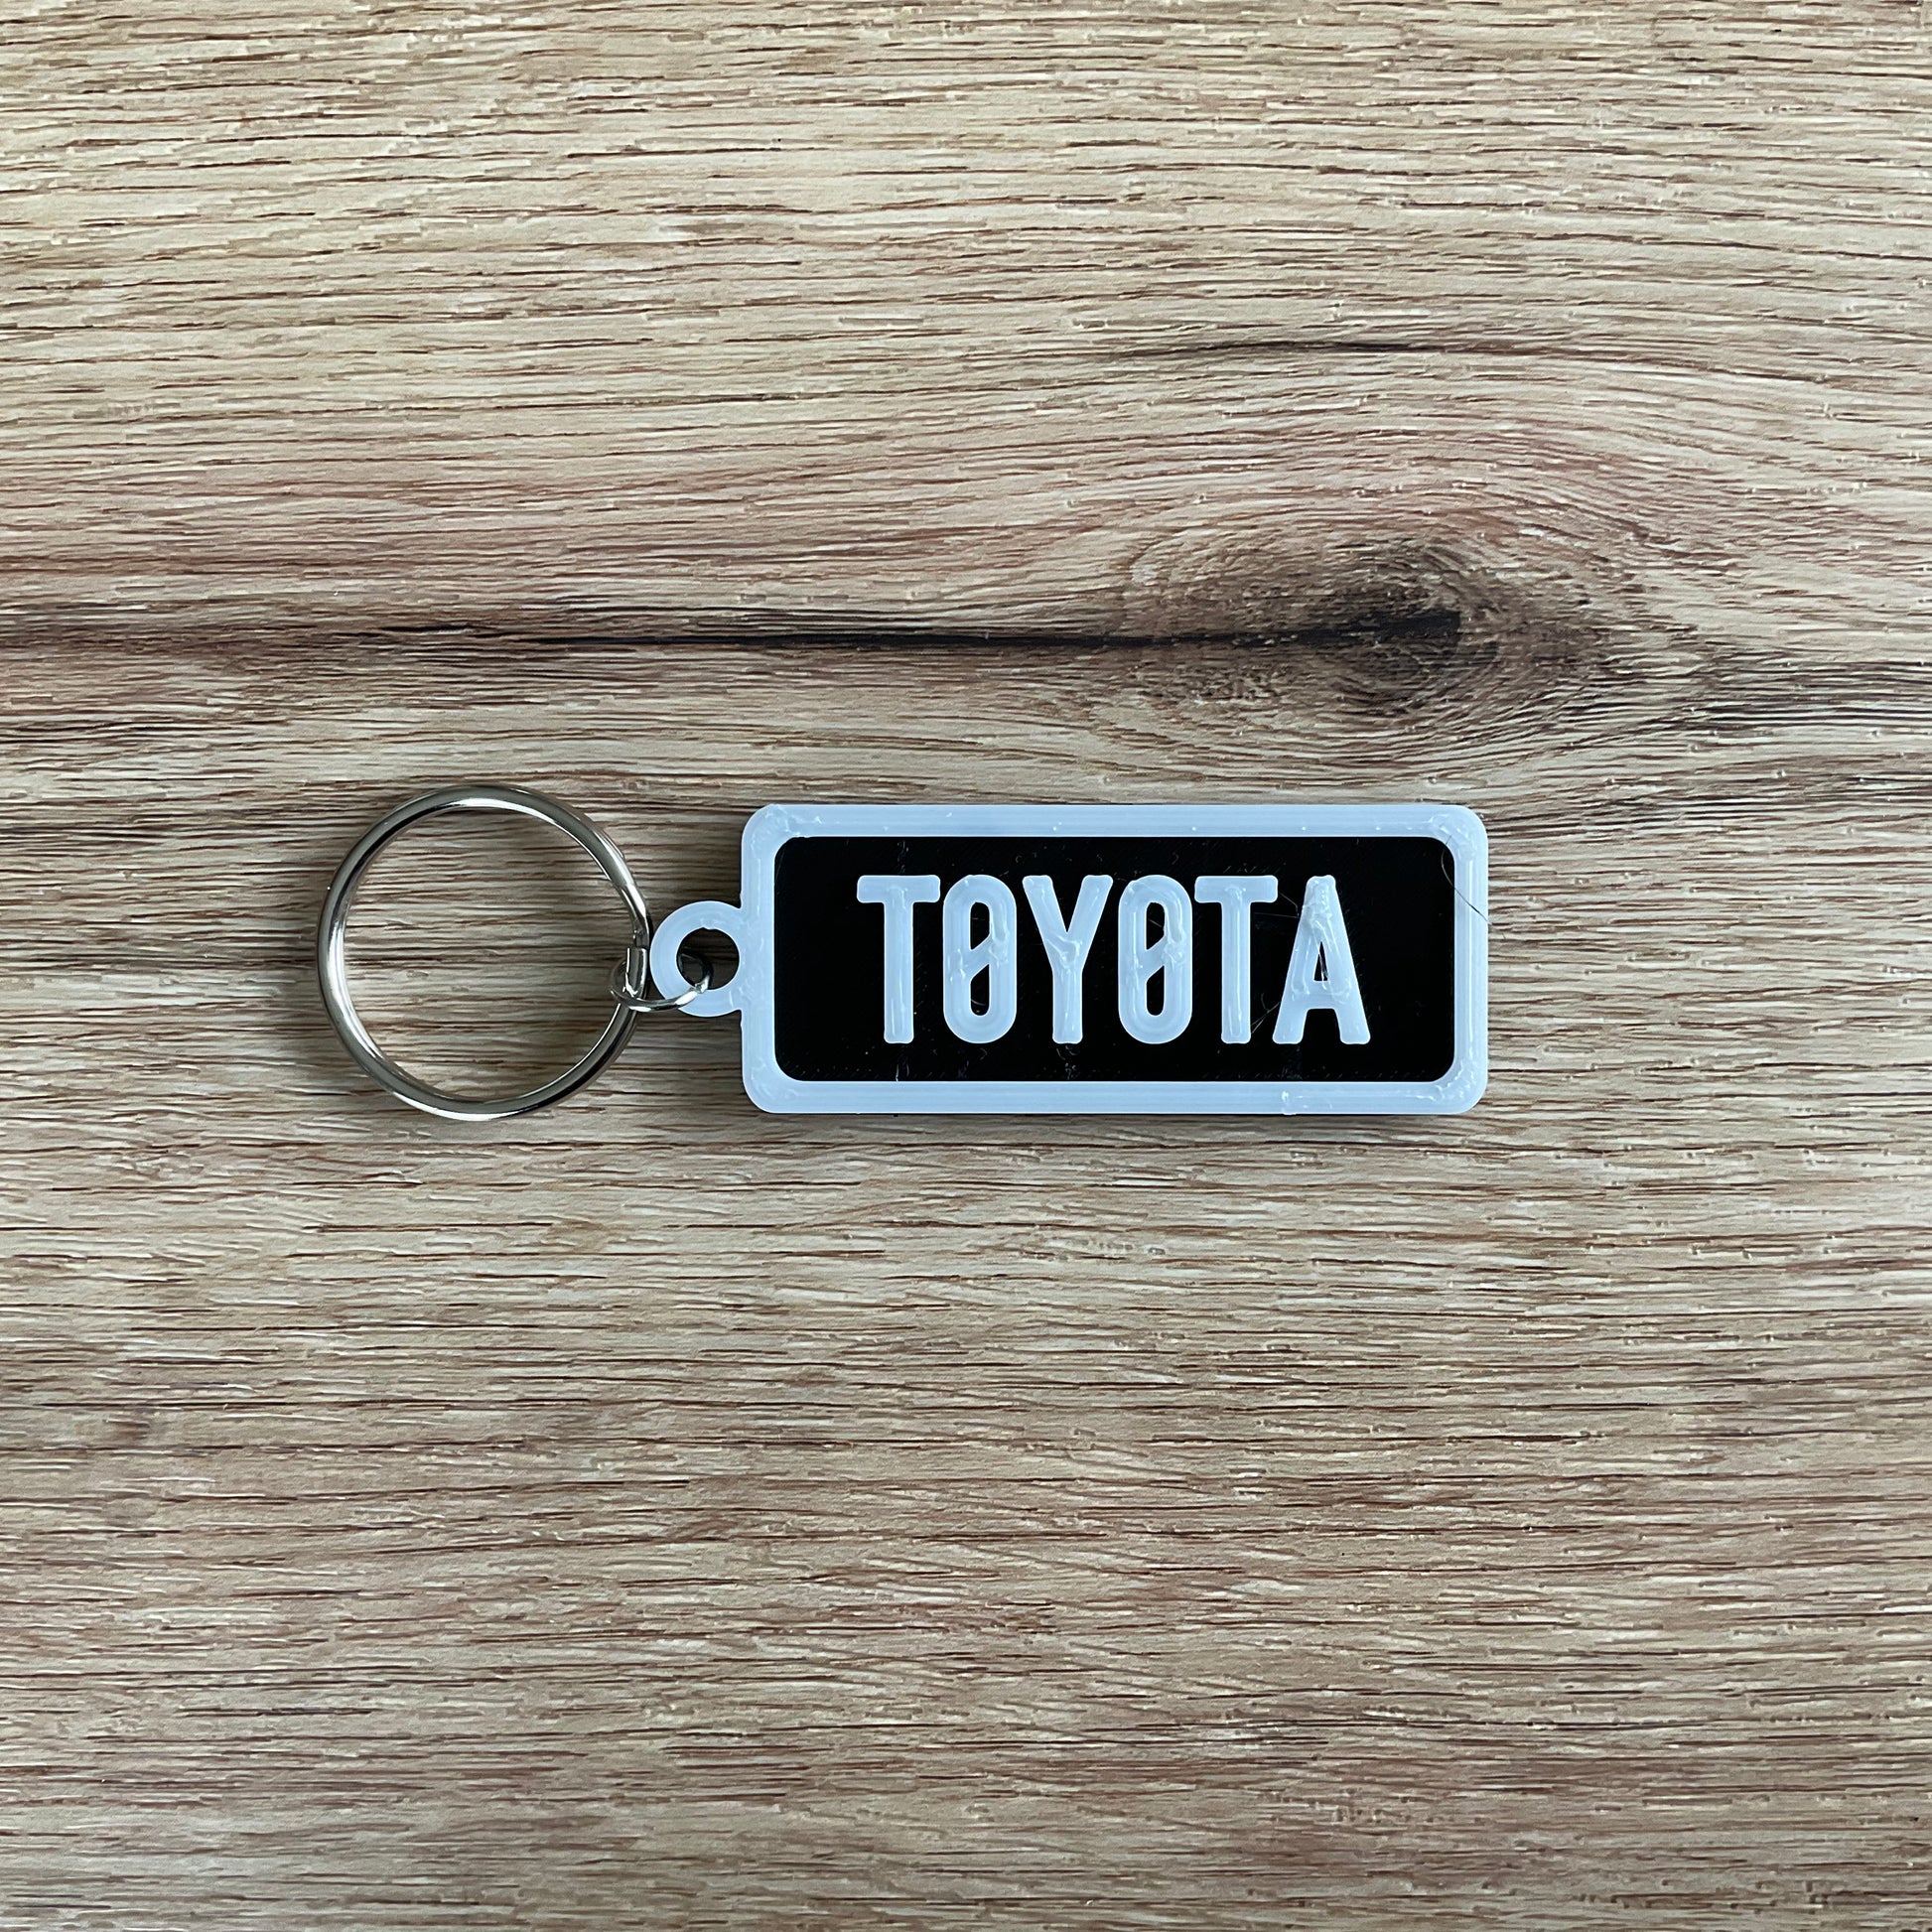 an image of the black Toyota keychain with white border and lettering.